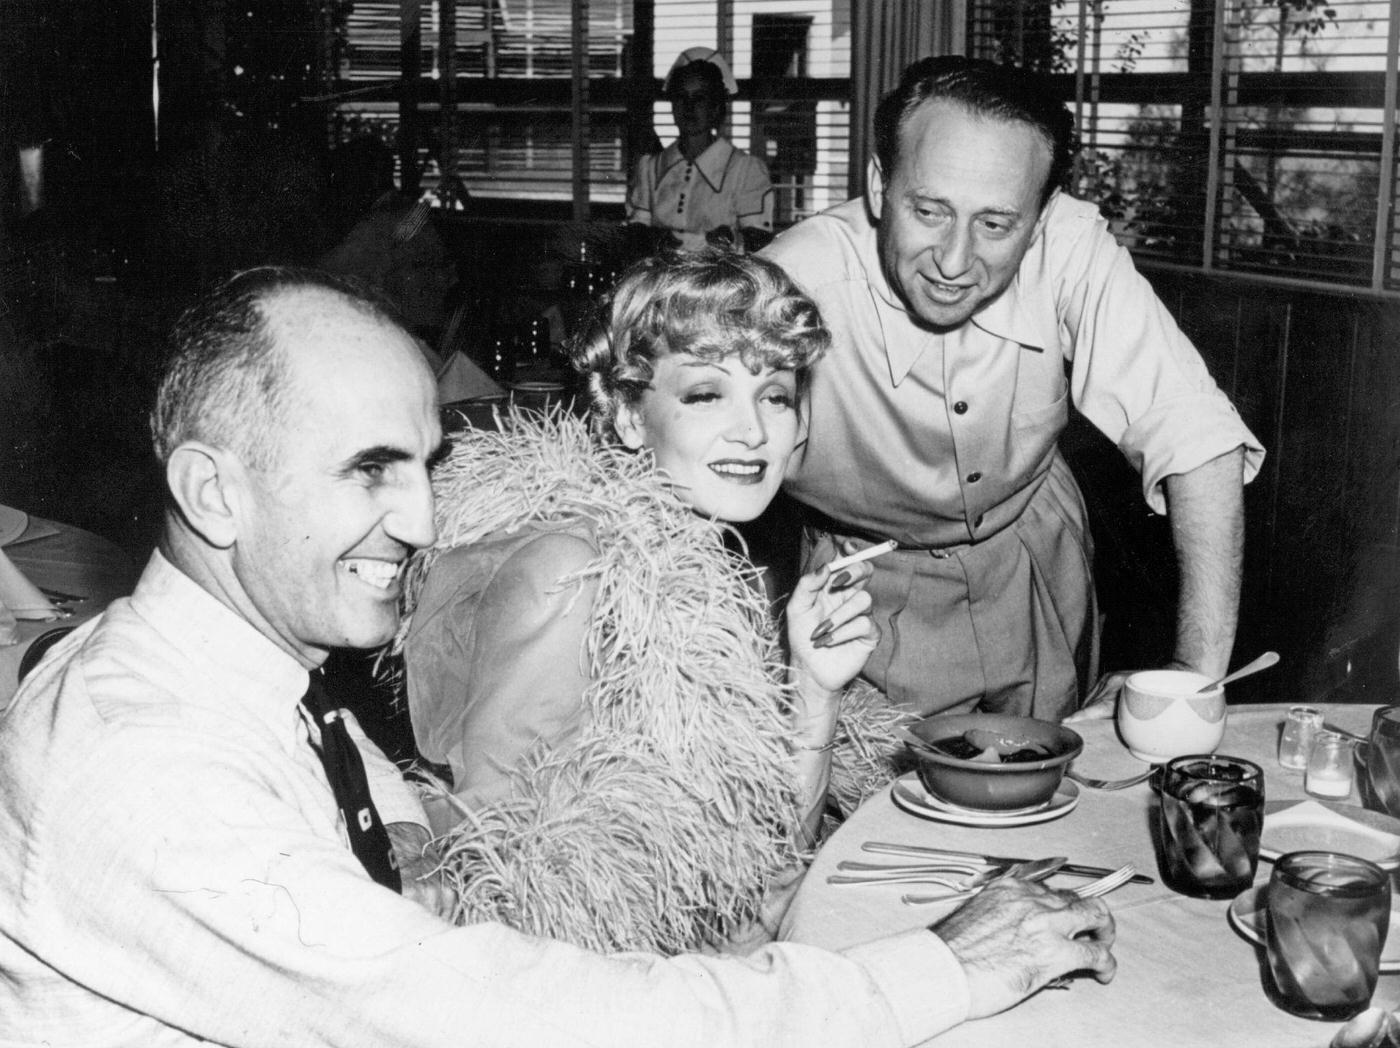 Marlene Dietrich has lunch with director George Marshall and producer Joe Pasternak on the set of her latest film 'Destry Rides Again' in 1939.